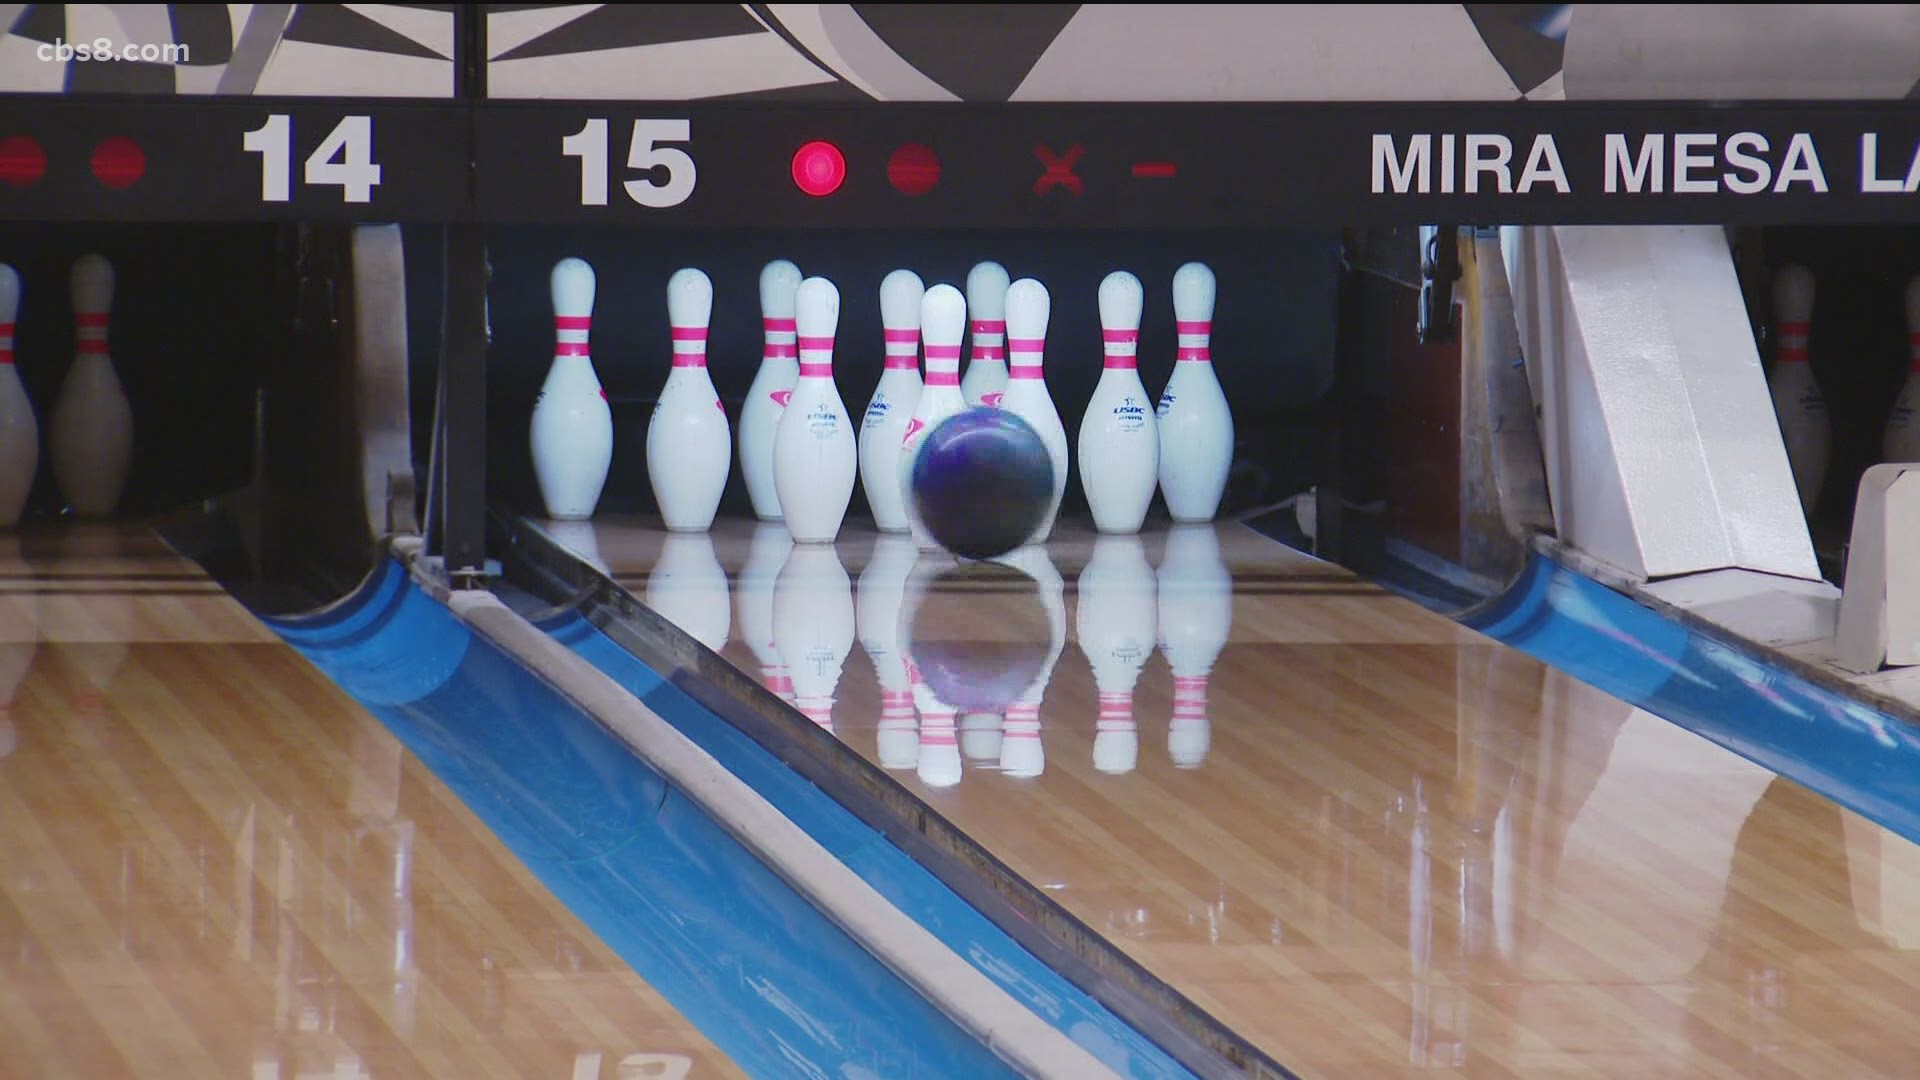 Bowling alleys across the nation remain permanently closed but new owners saved Mira Mesa Lanes and it reopened this week.